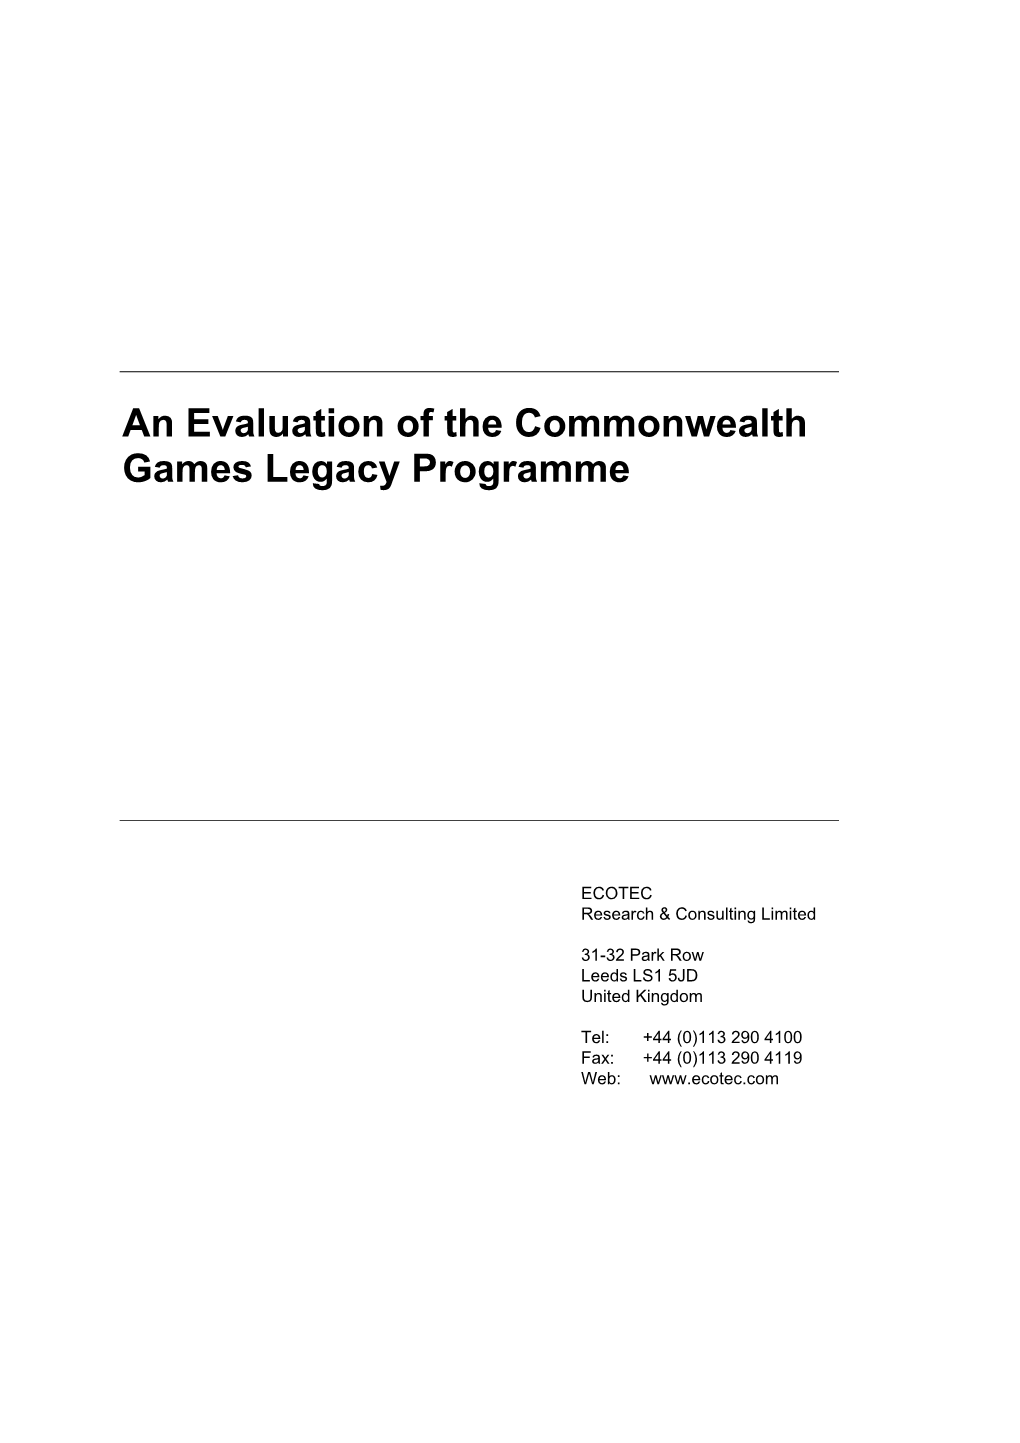 An Evaluation of the Commonwealth Games Legacy Programme